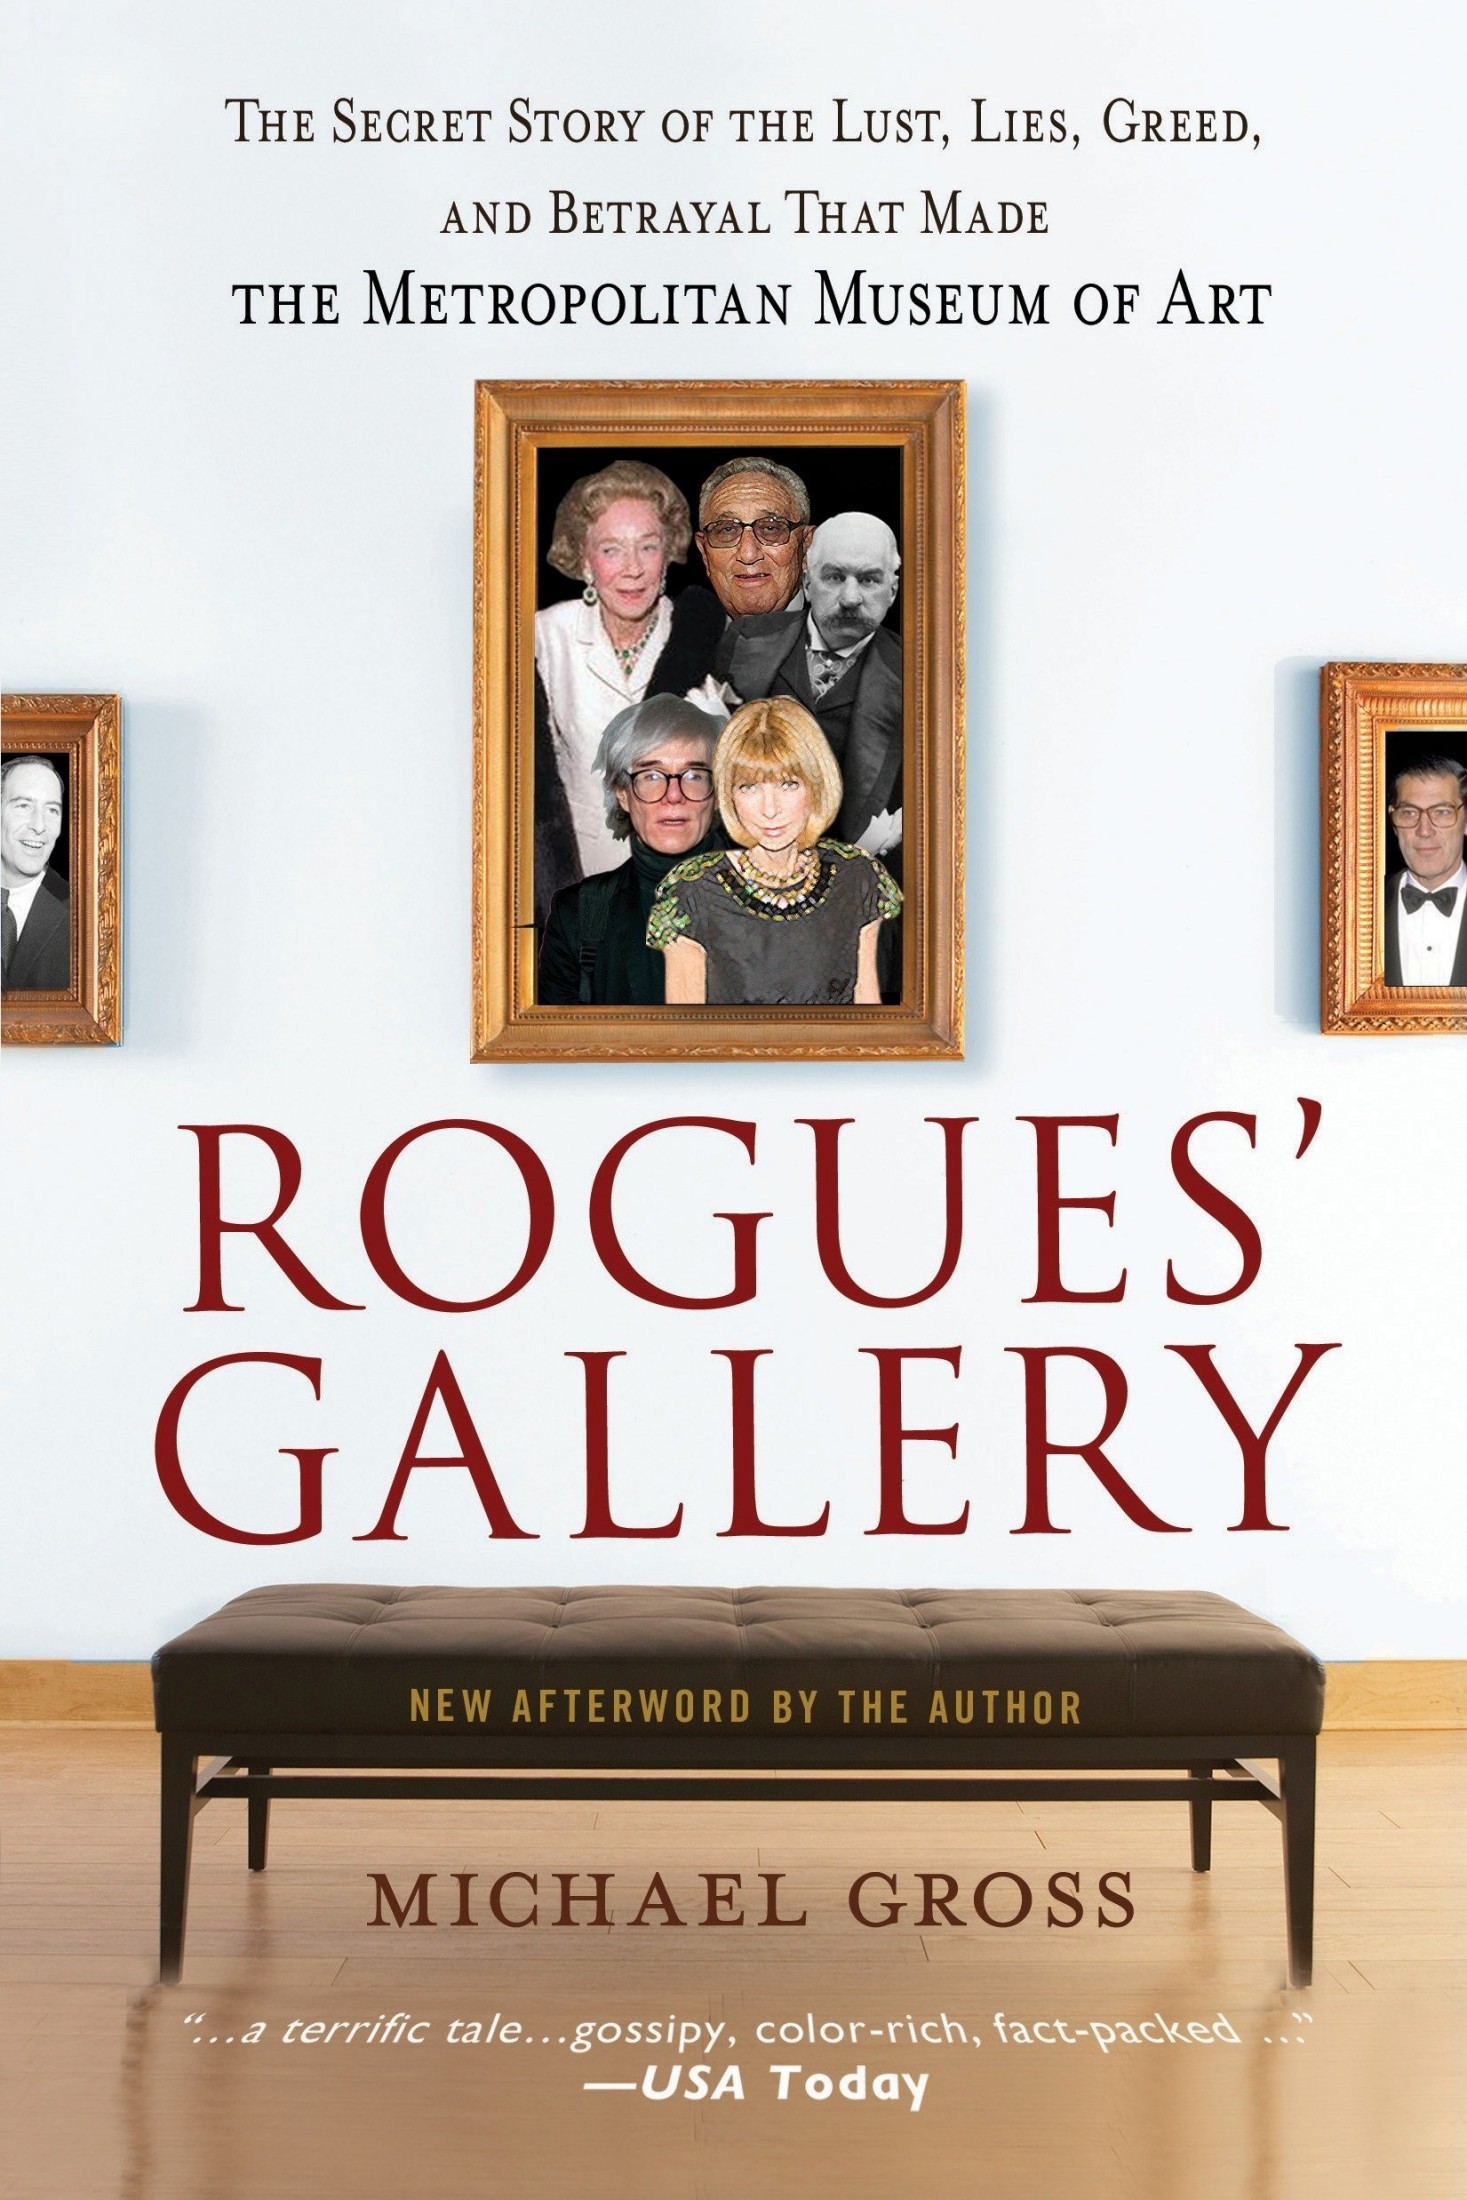 Rogues' Gallery: The Secret Story of the Lust, Lies, Greed, and Betrayals That Made the Metropolitan Museum of Art